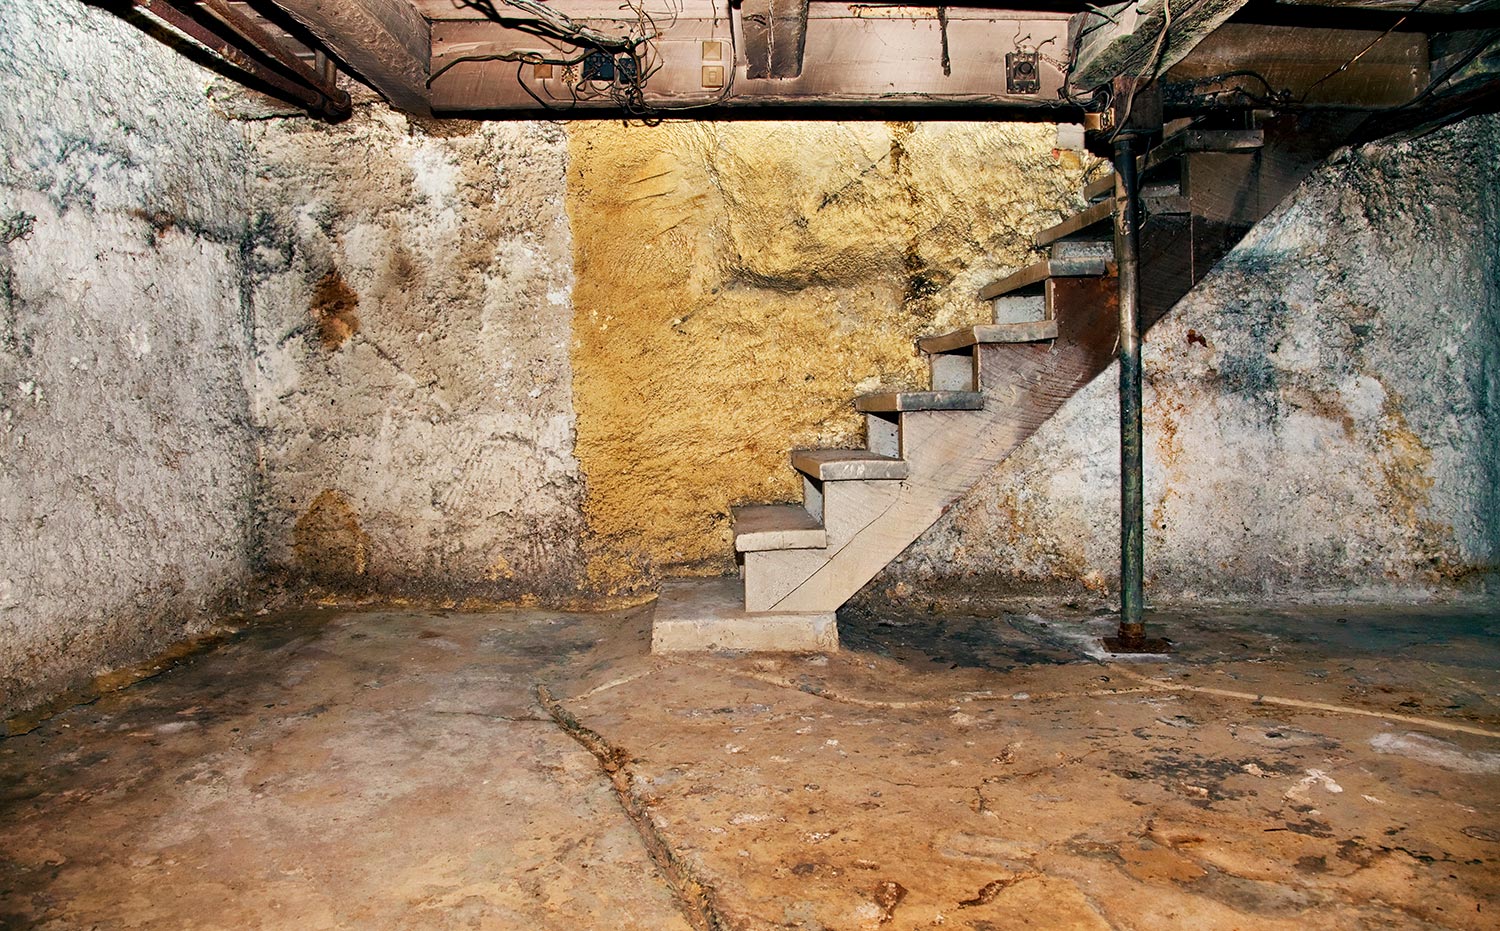 Decrepit basement featuring a soot-covered stairway